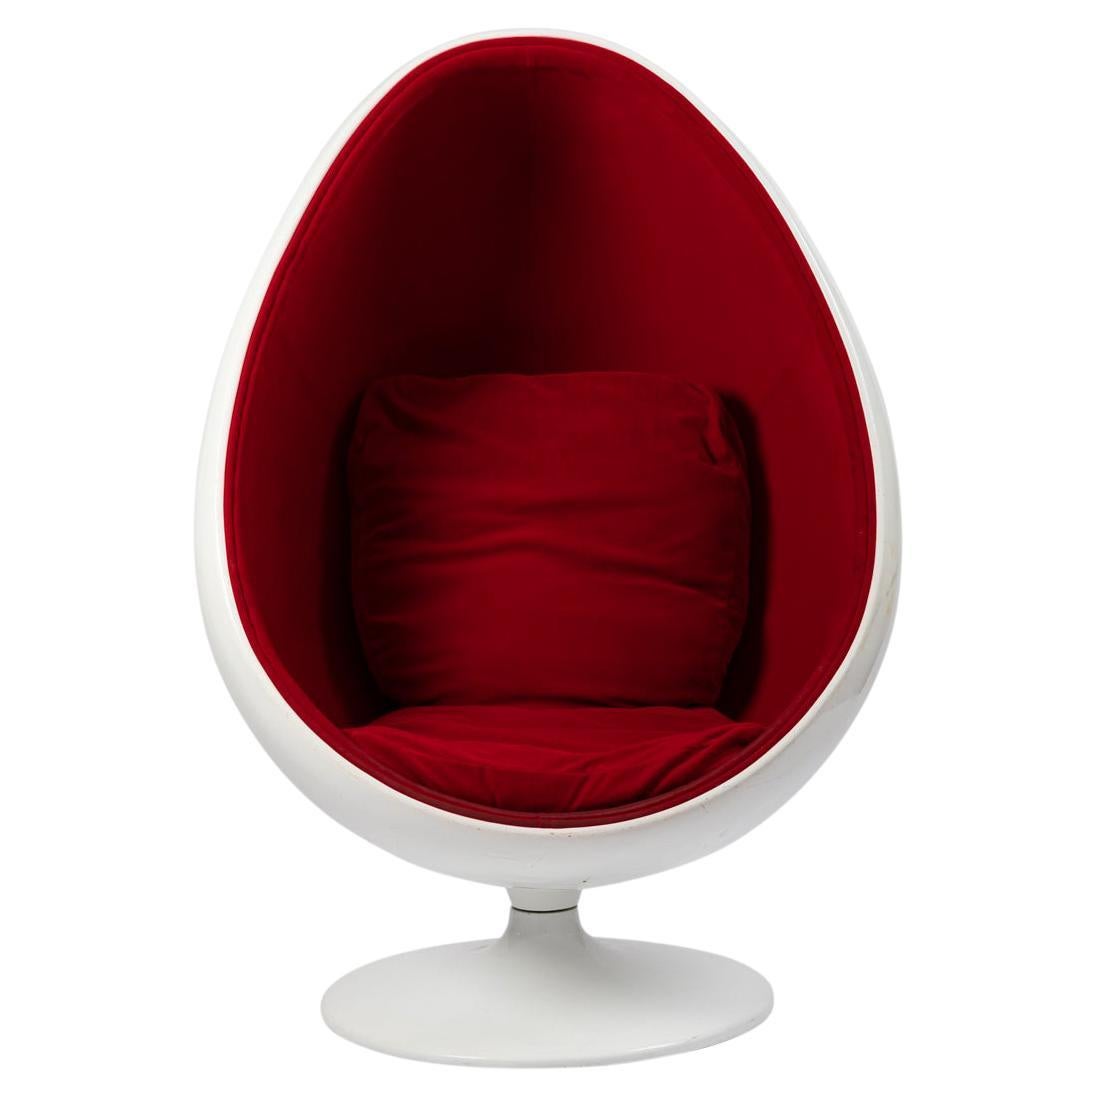 Eggg chair, 1990s